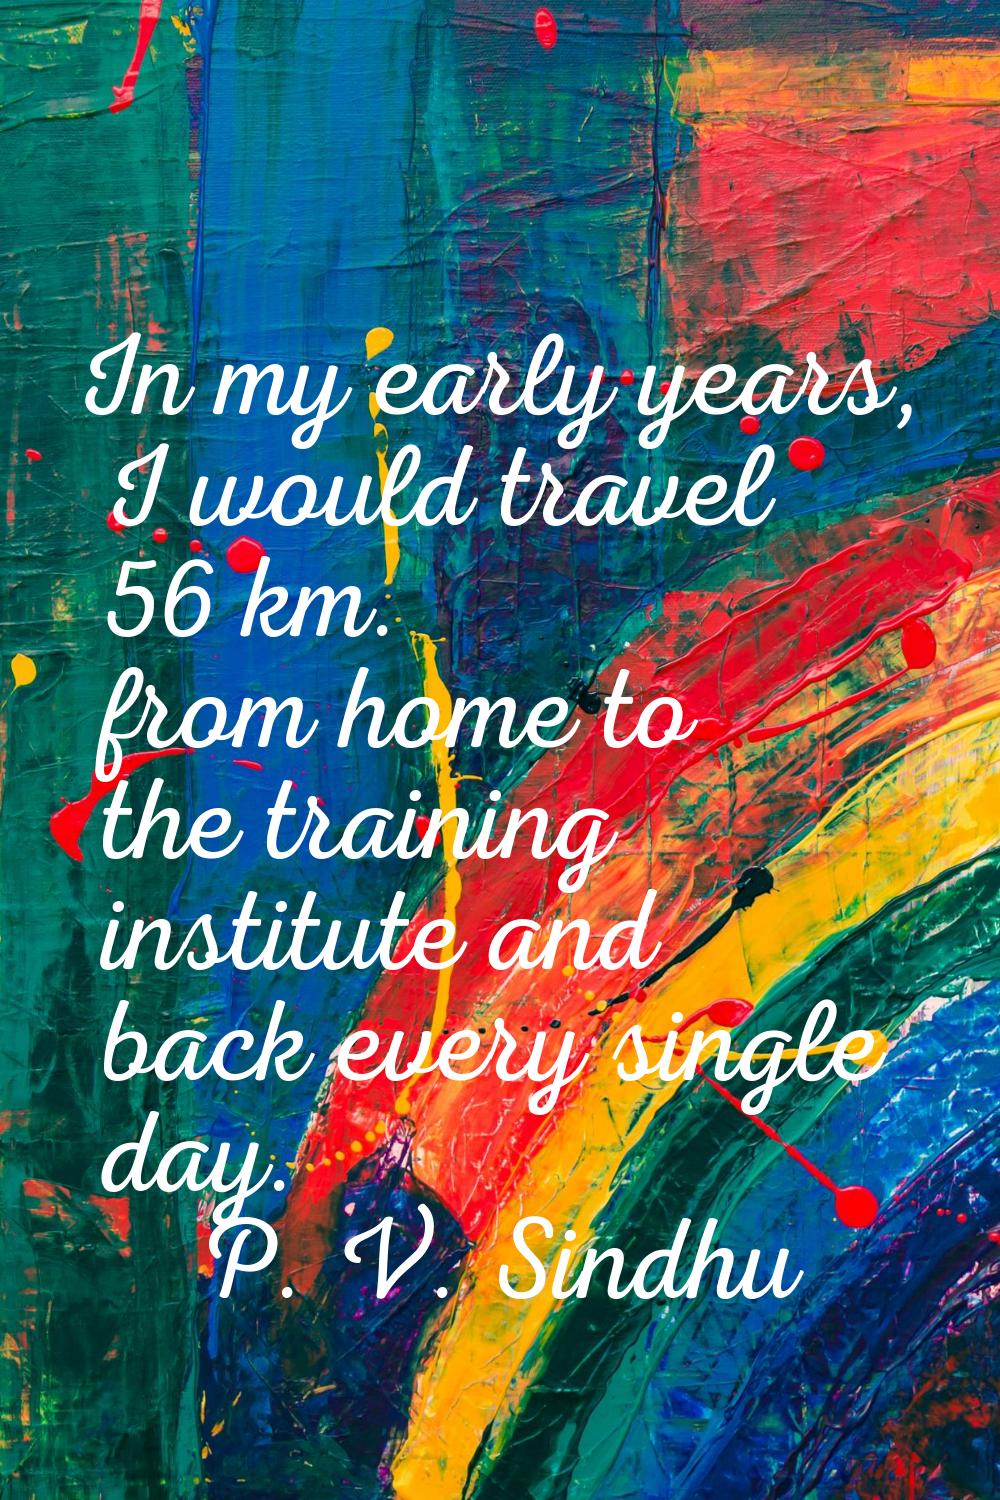 In my early years, I would travel 56 km. from home to the training institute and back every single 